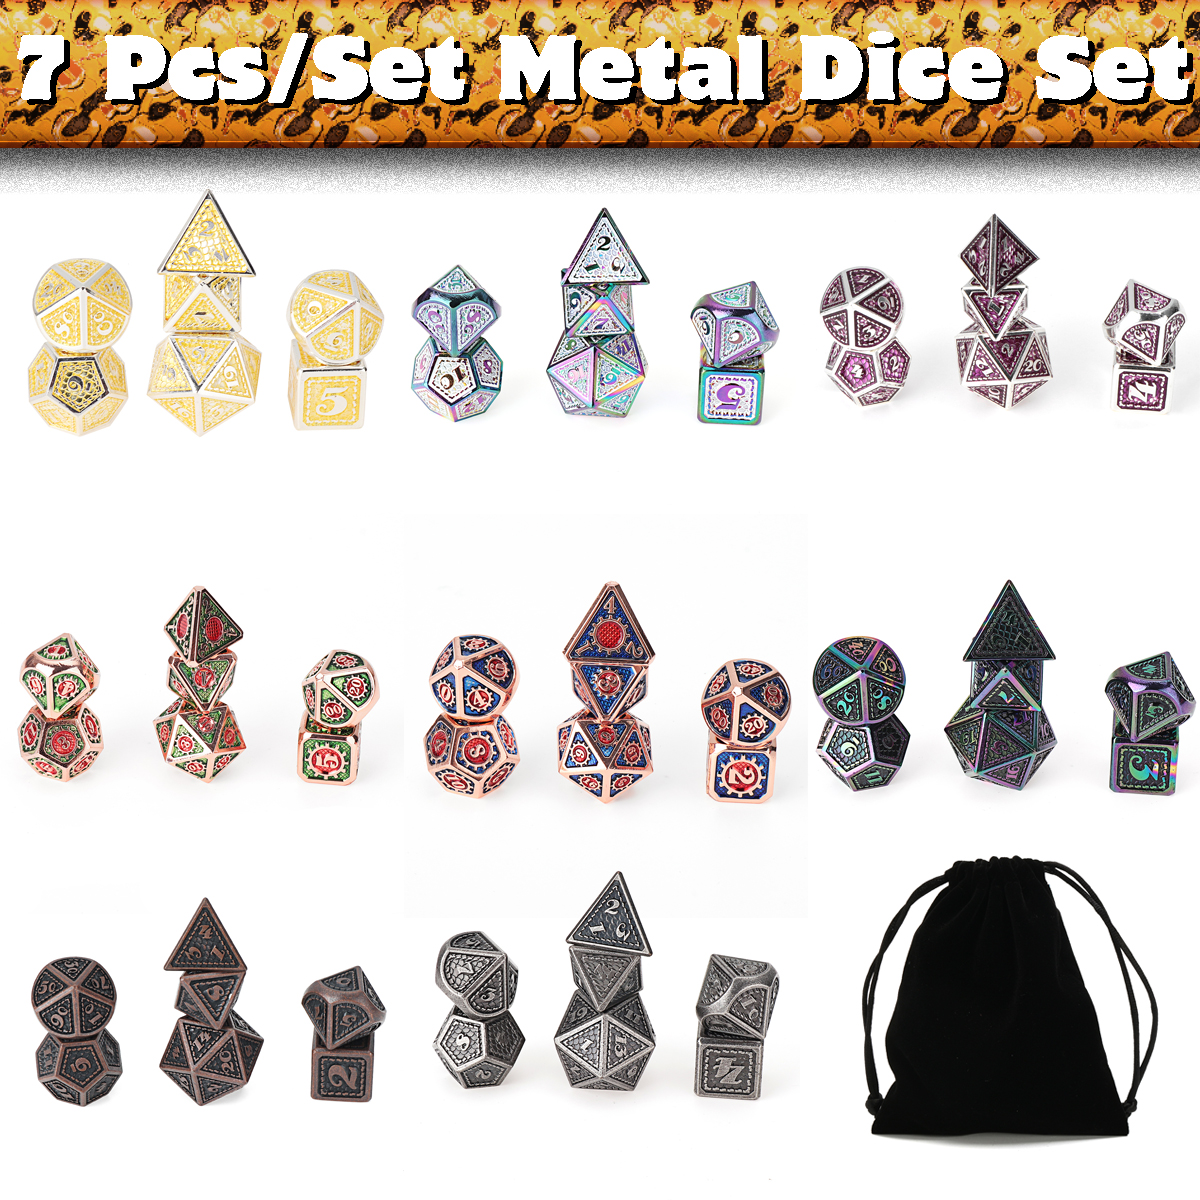 Beutiful-Color-Metal-Polyhedral-Dice-Multi-side-Dice-Set-For-DND-RPG-MTG-Role-Playing-Board-Game-Wit-1716609-3